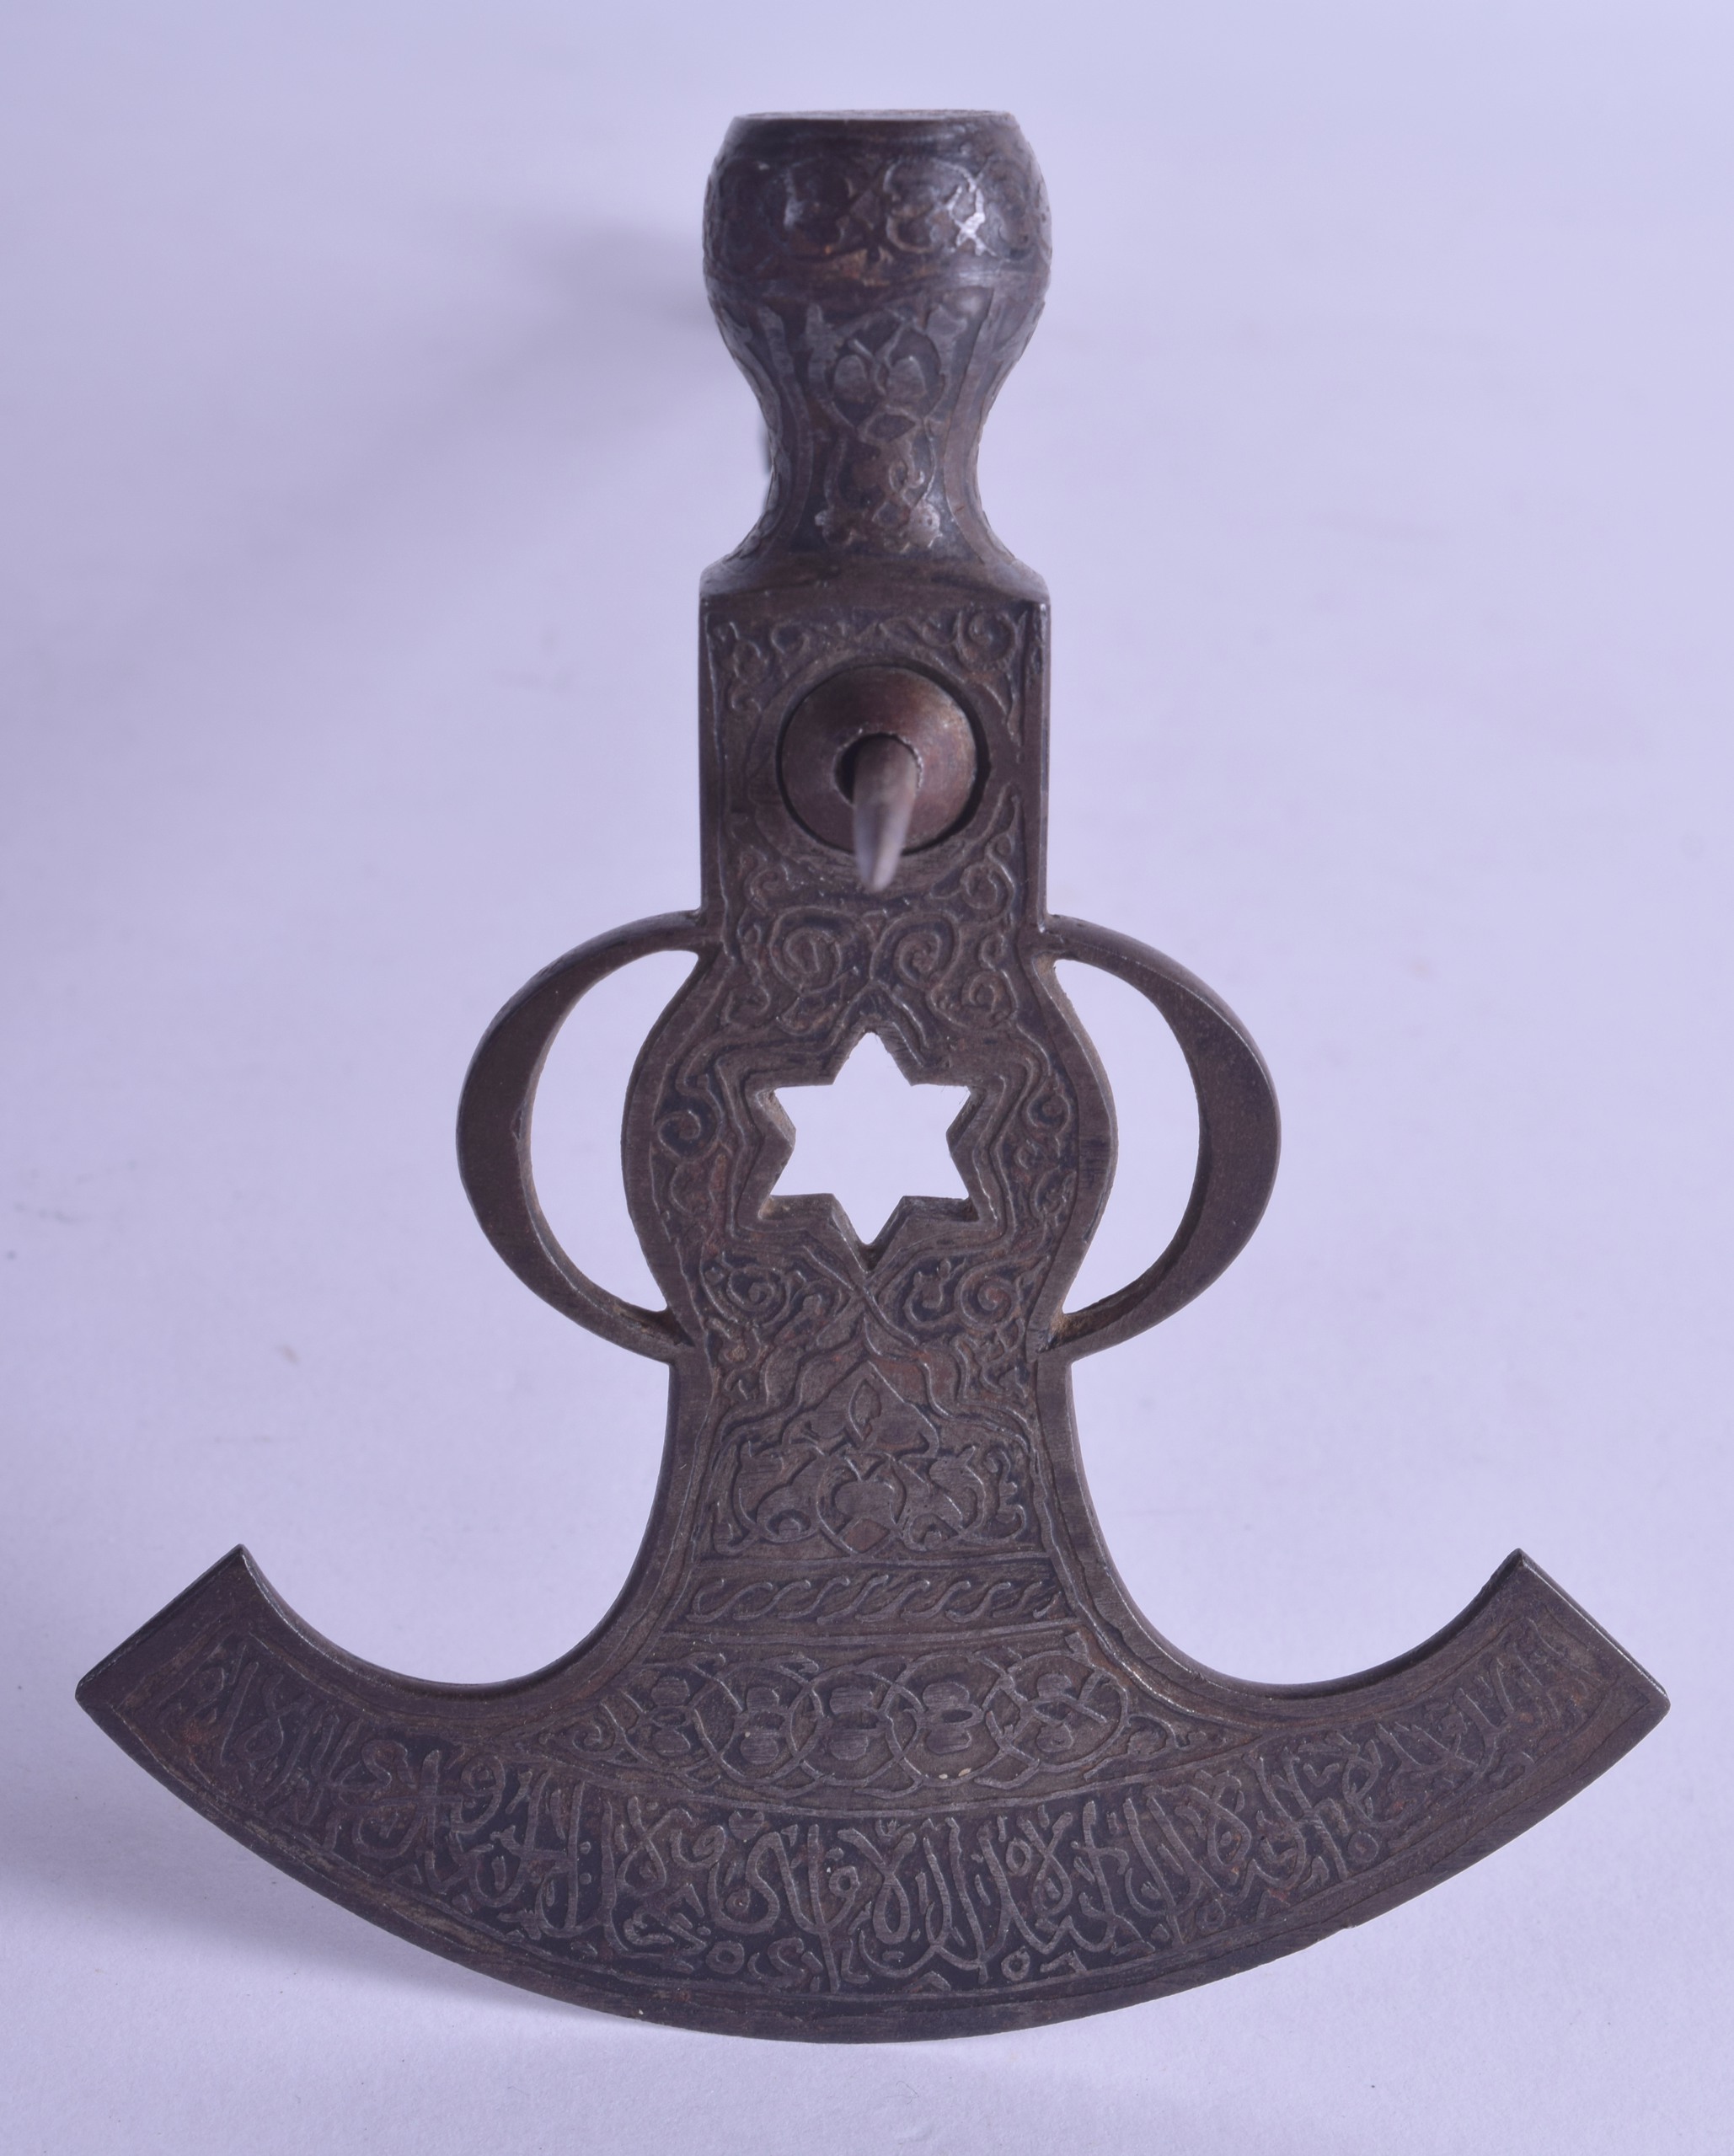 A GOOD 18TH/19TH CENTURY ISLAMIC QAJAR STEEL SUGAR AXE engraved with kufic script and extensive - Image 3 of 4